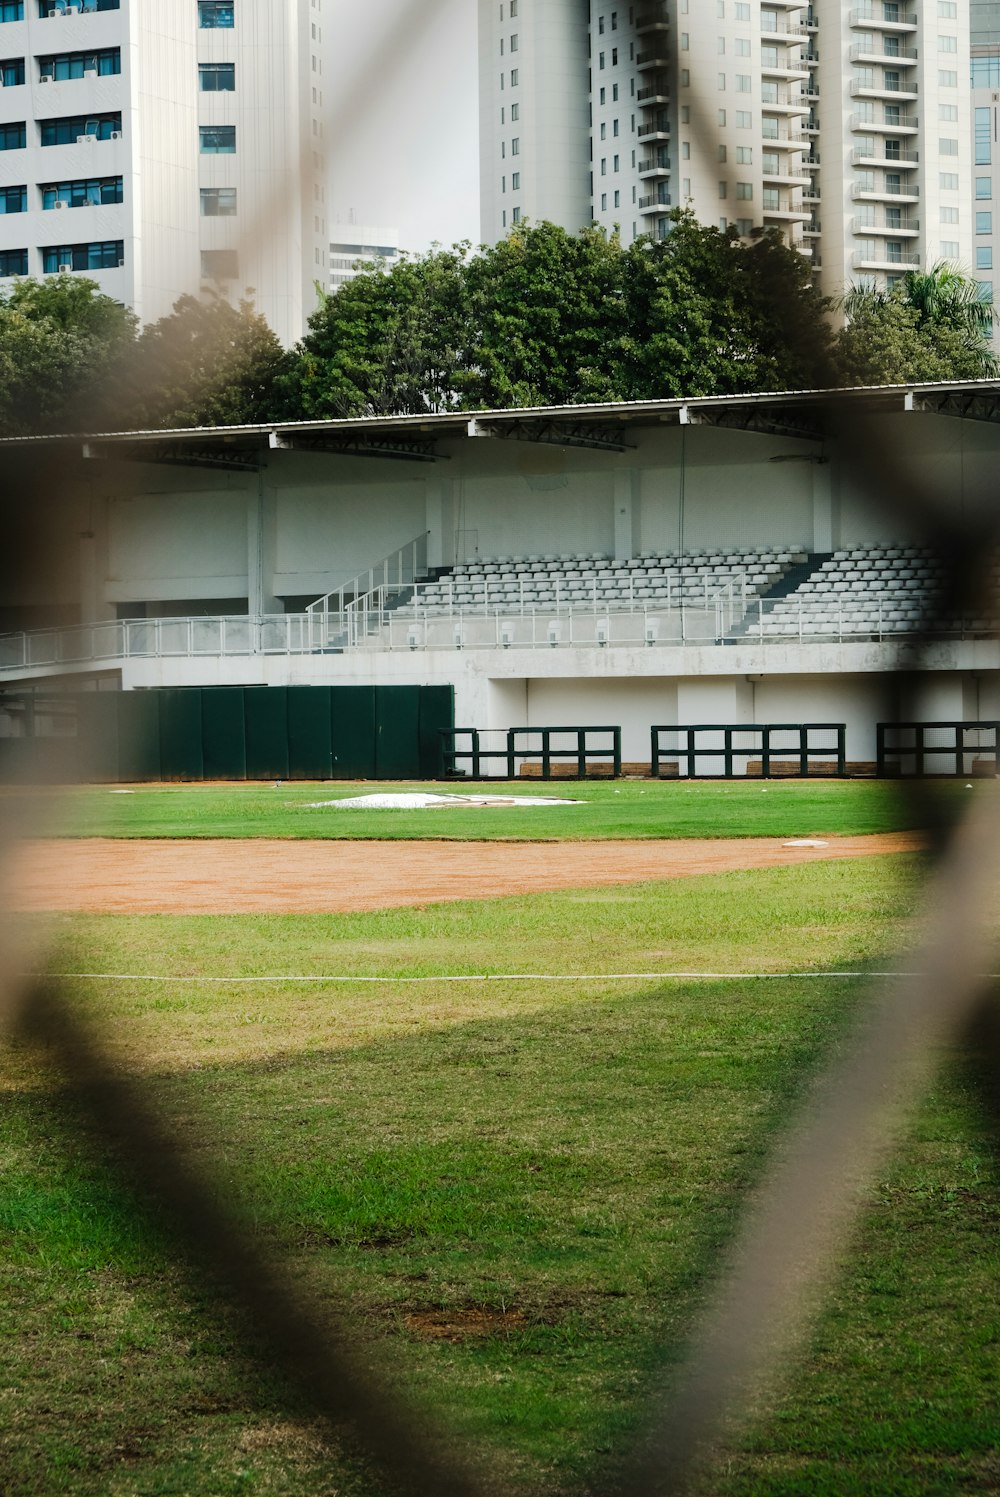 a baseball field through a fence with buildings in the background